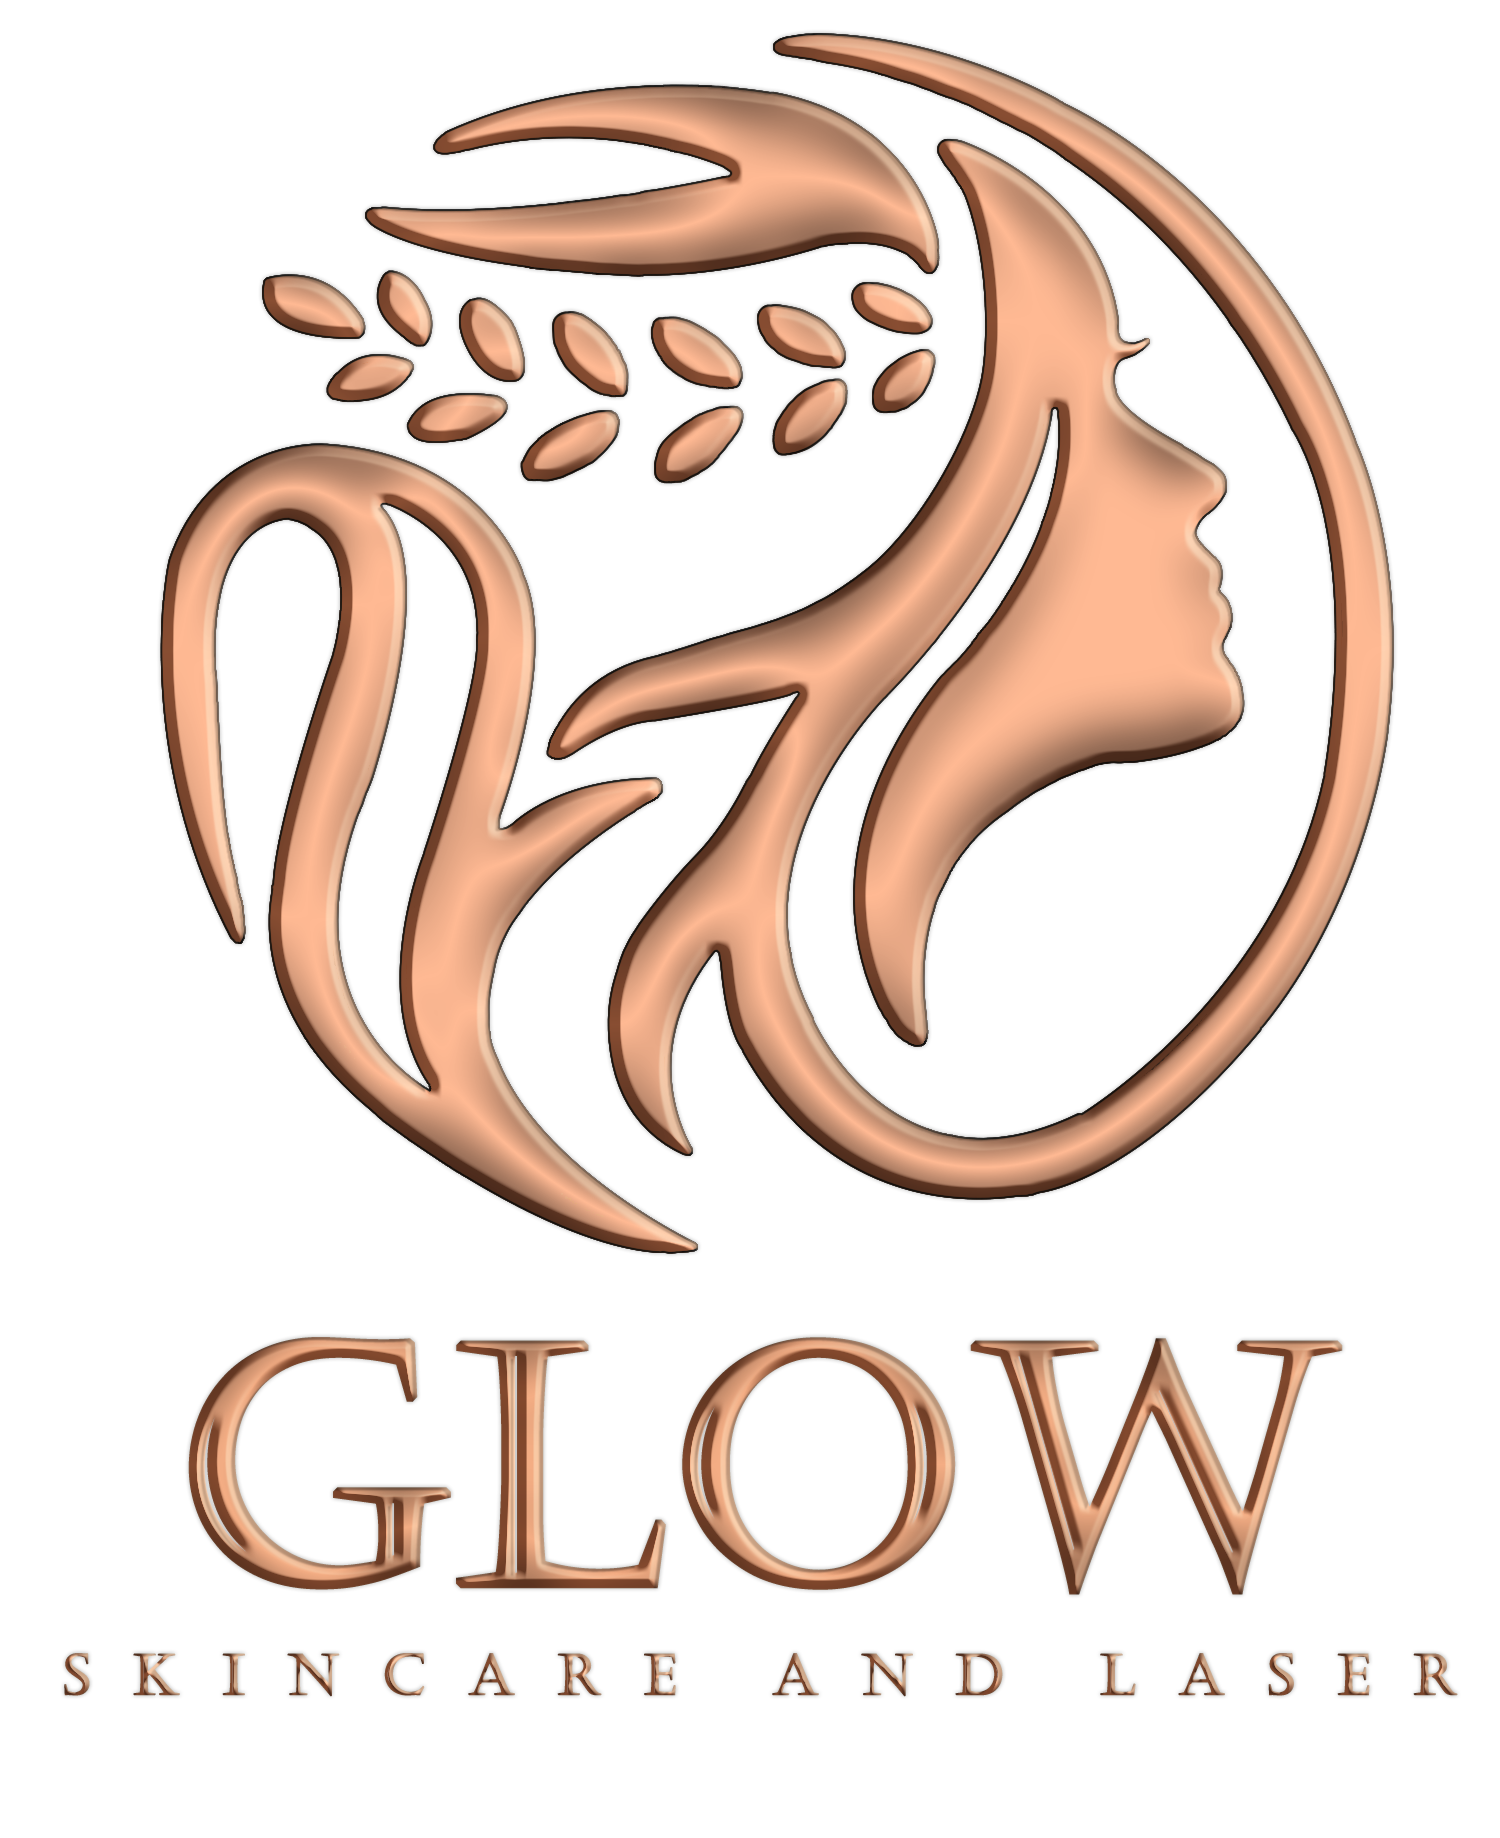 Glow Skincare And Laser